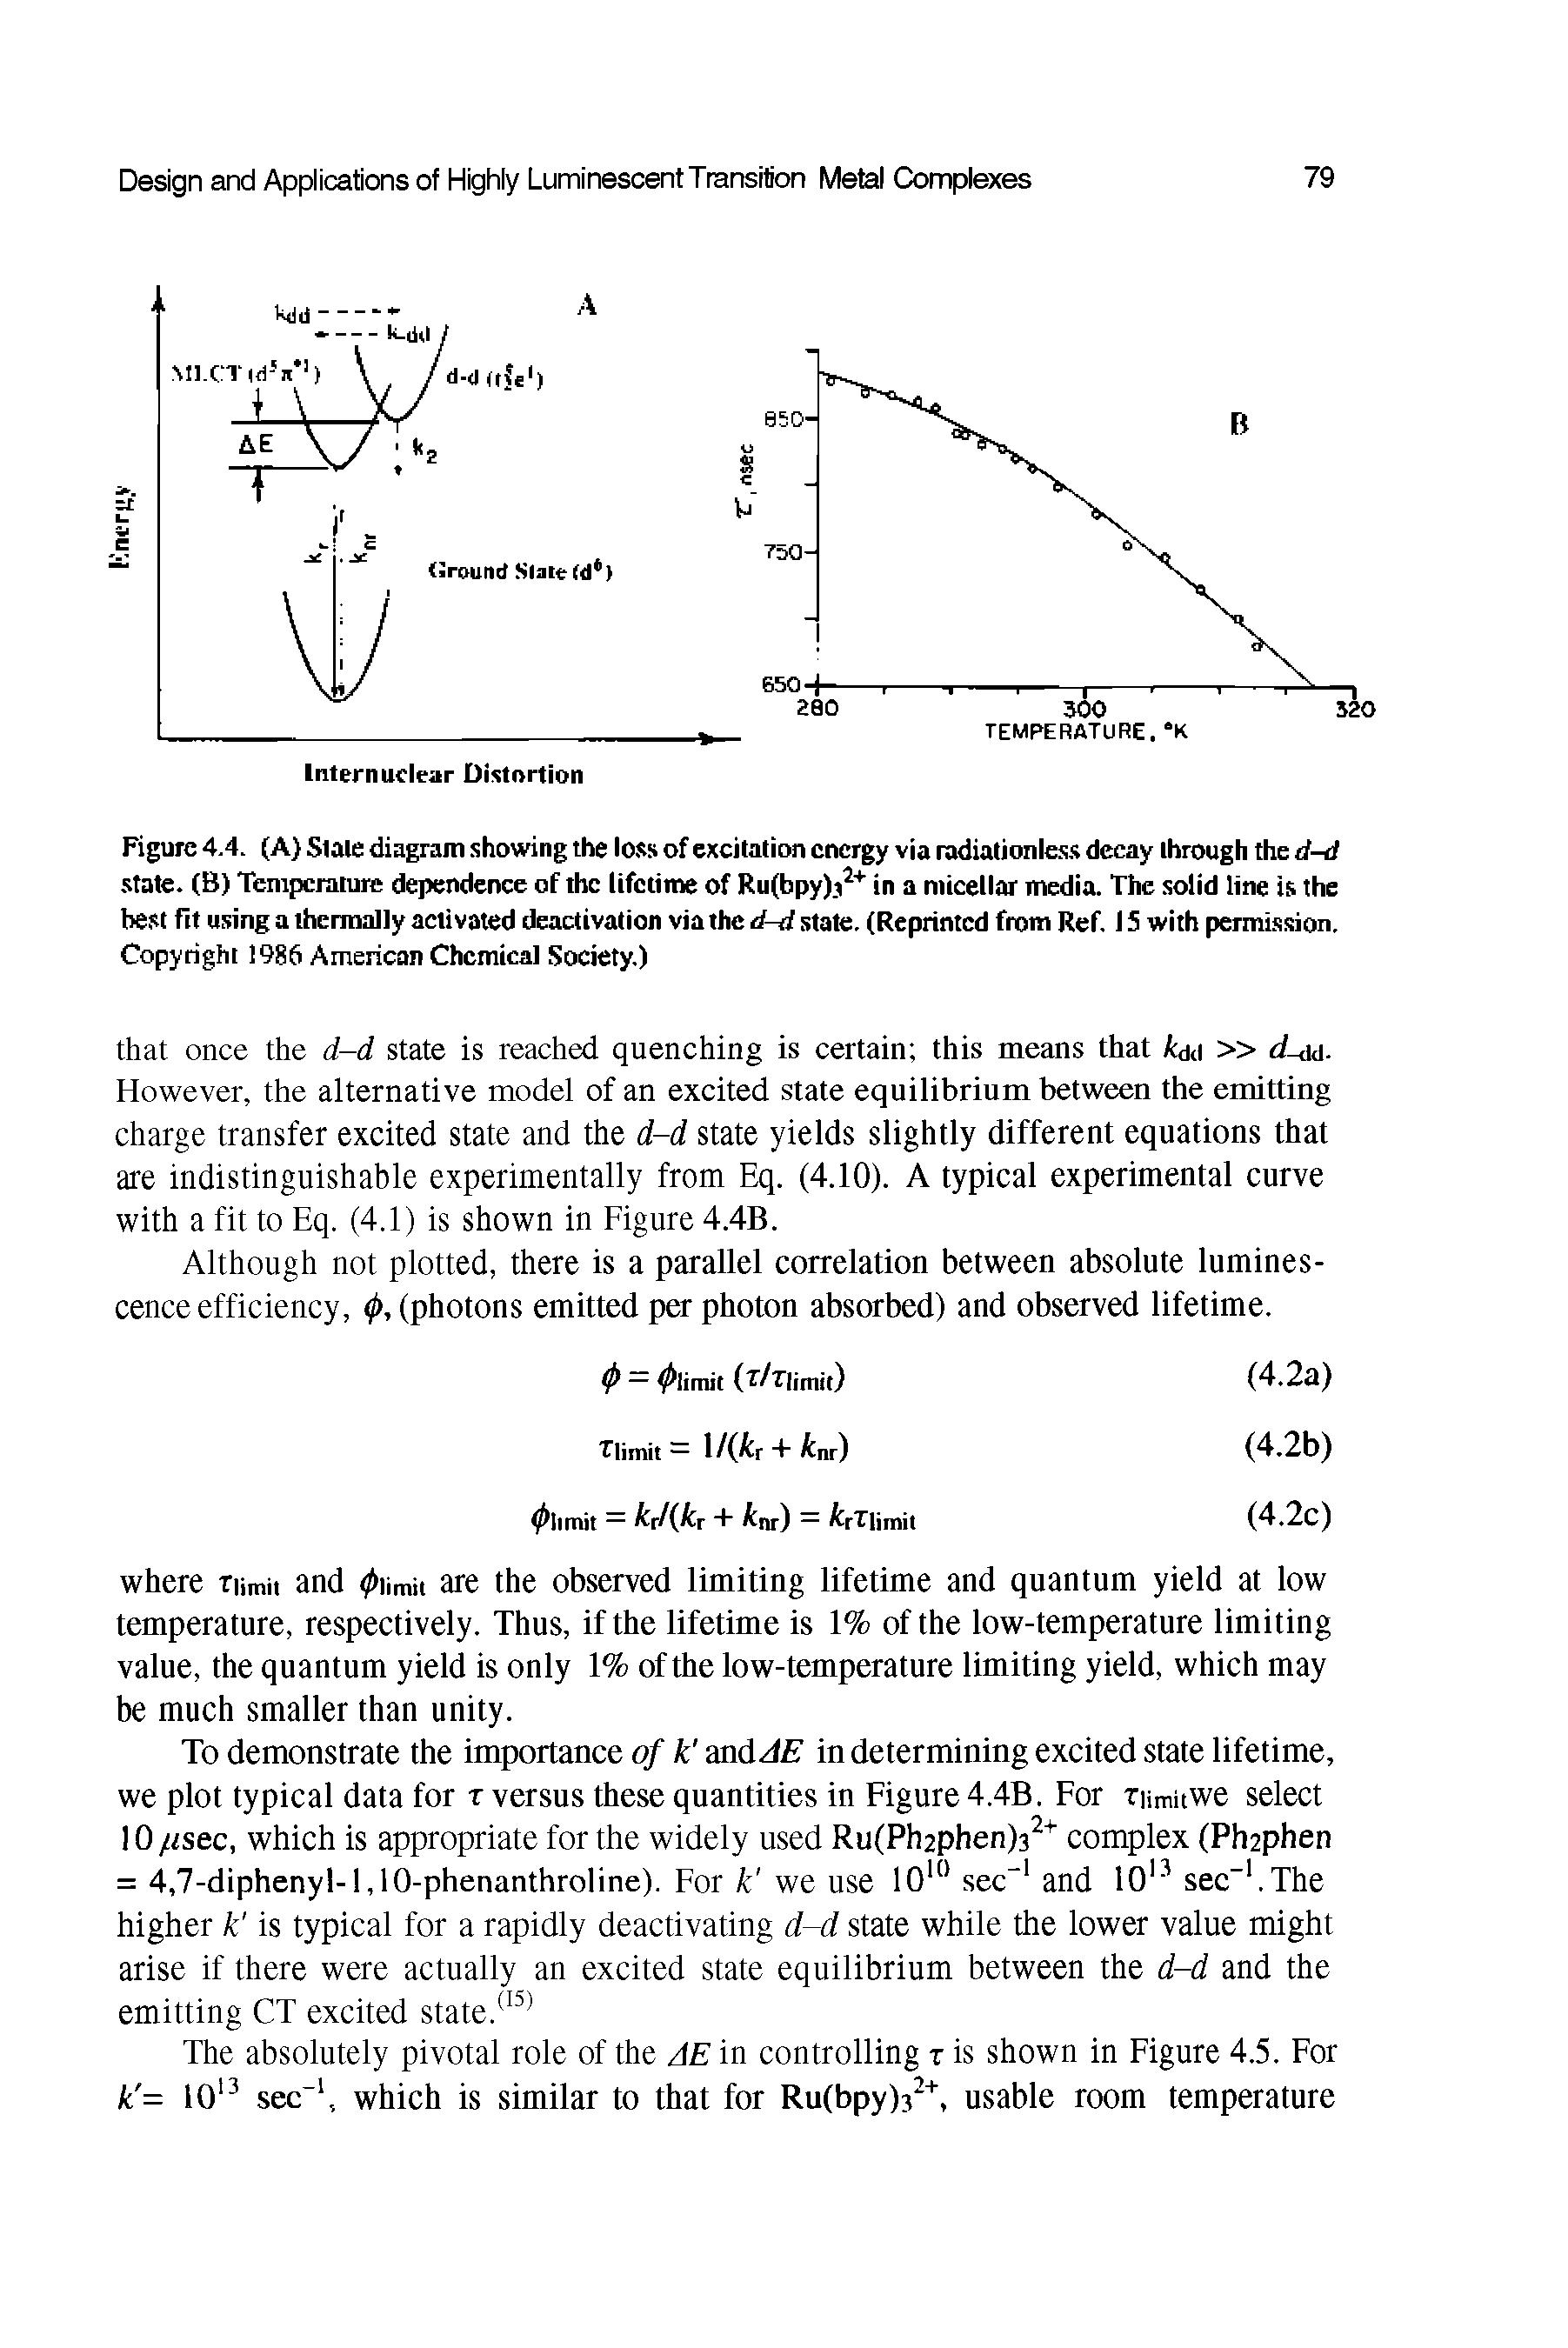 Figure 4.4. (A) Stale diagram showing the loss of excitation energy via radiationless decay through the d-d state. (B) Temperature dependence of the lifetime of Ru(bpy)ji+ in a micellar media. The solid line is the best fit using a thermally activated deactivation via the d-d state. (Reprinted from Ref. 15 with permission. Copyright 1986 American Chemical Society.)...